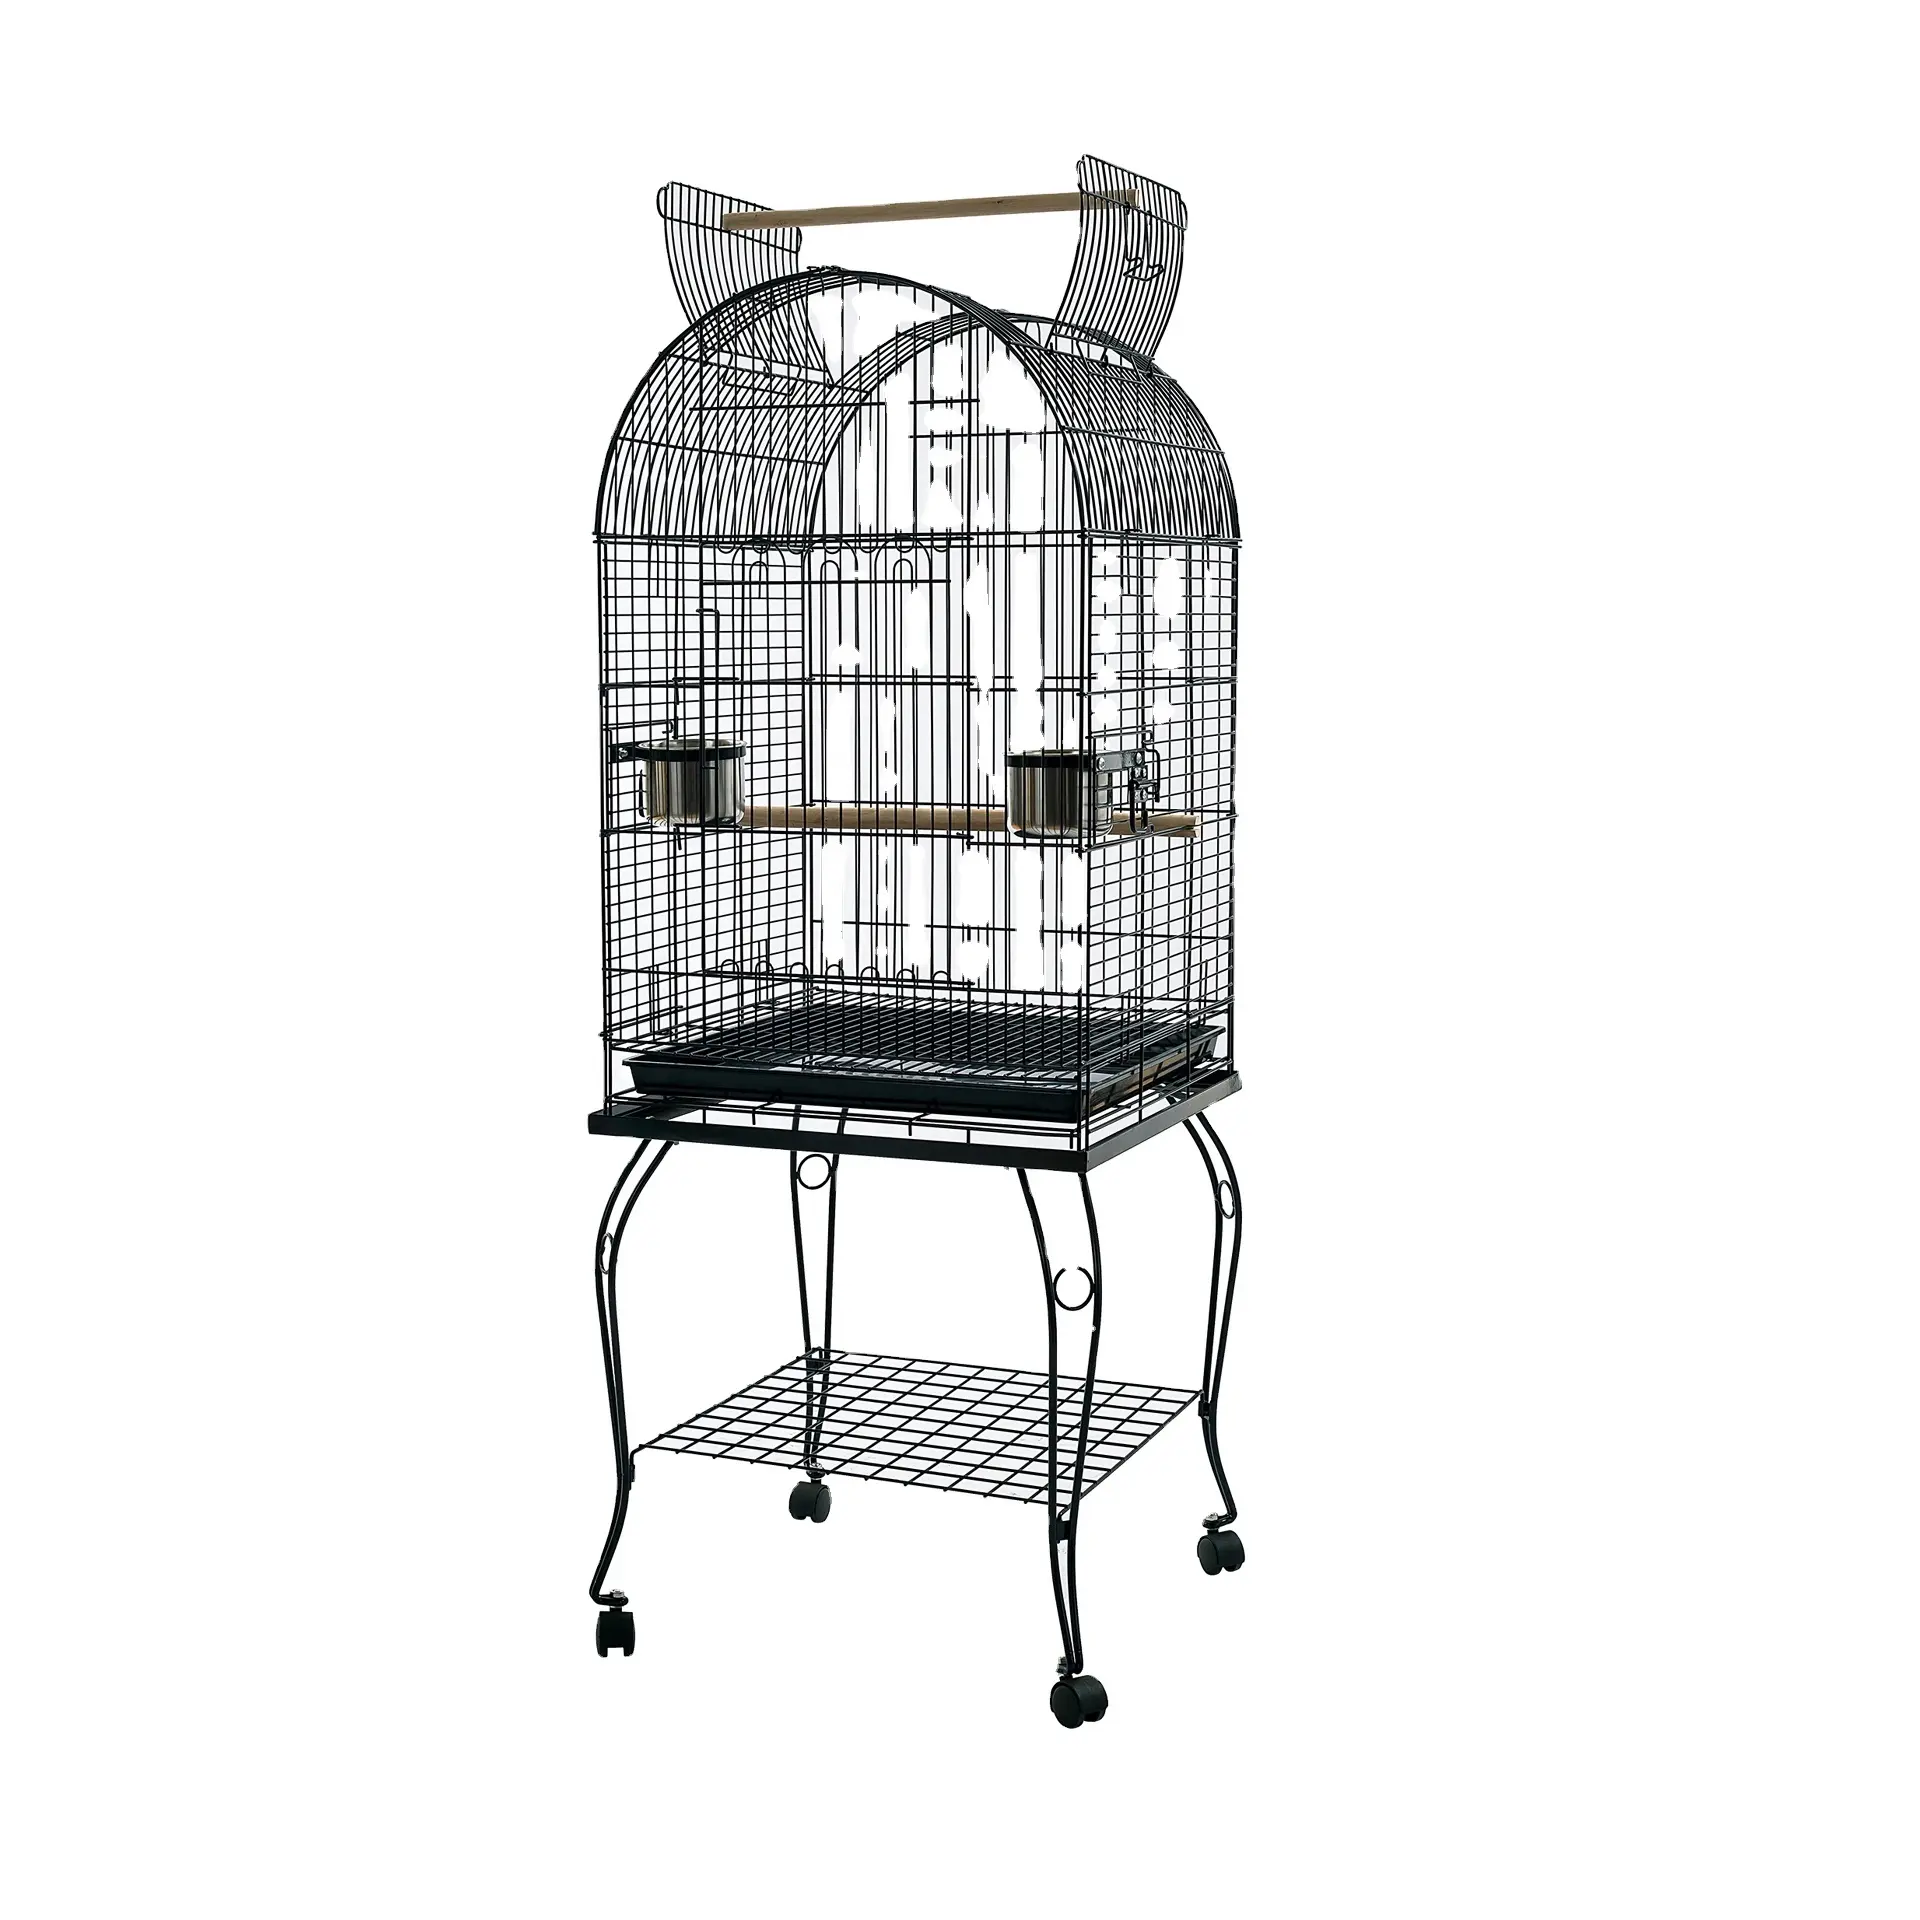 Sản Phẩm Dành Cho Thú Cưng Của ORIENPET & OASISPET Bird Cage Dây Parrot Cage With Stand Ready Stocks OPT39182/OPT39183OP